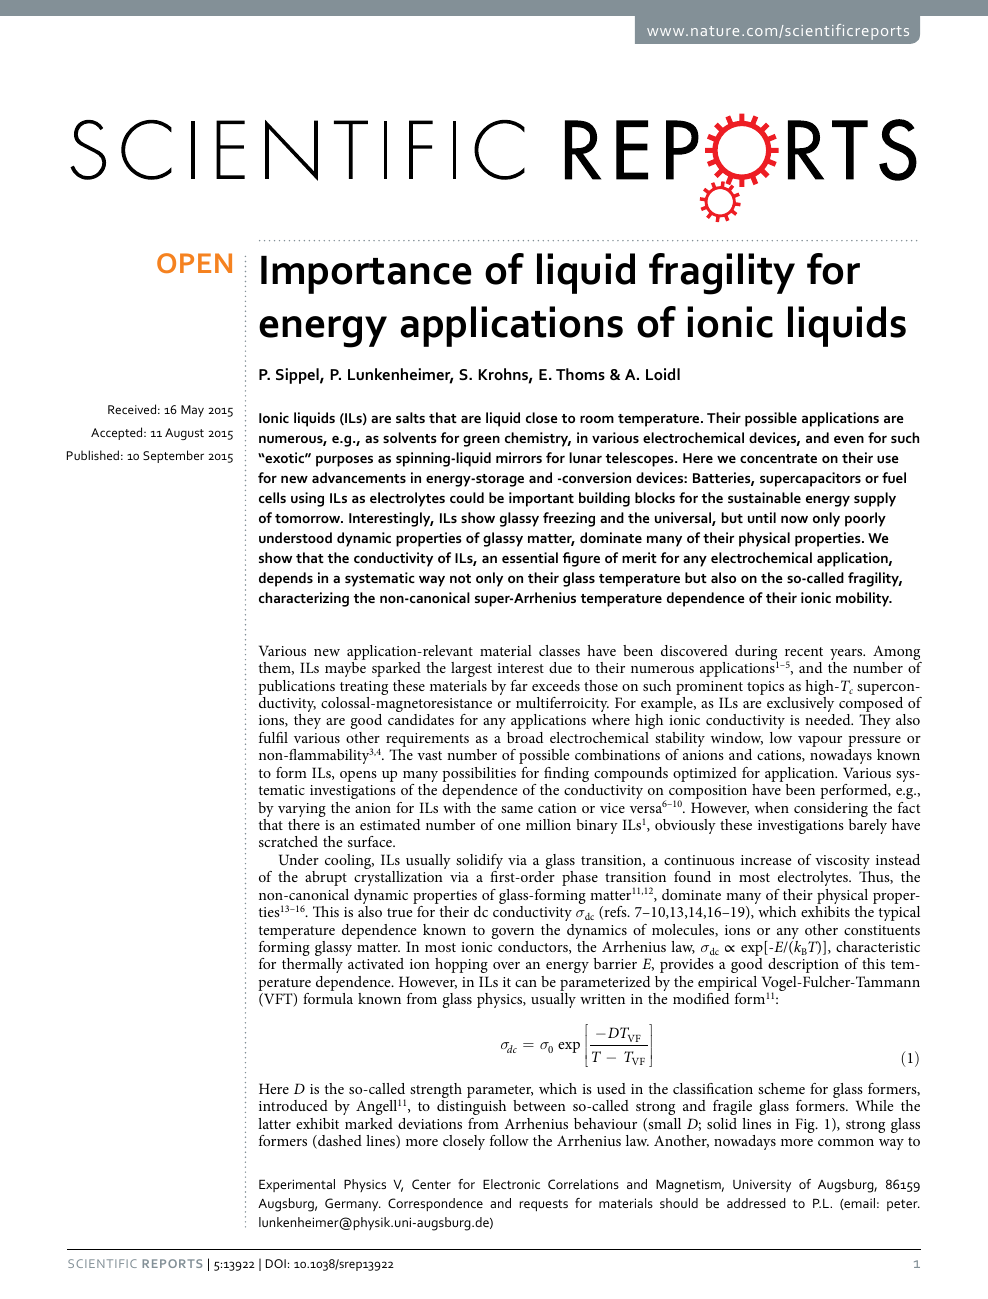 Importance Of Liquid Fragility For Energy Applications Of Ionic Liquids Topic Of Research Paper In Nano Technology Download Scholarly Article Pdf And Read For Free On Cyberleninka Open Science Hub